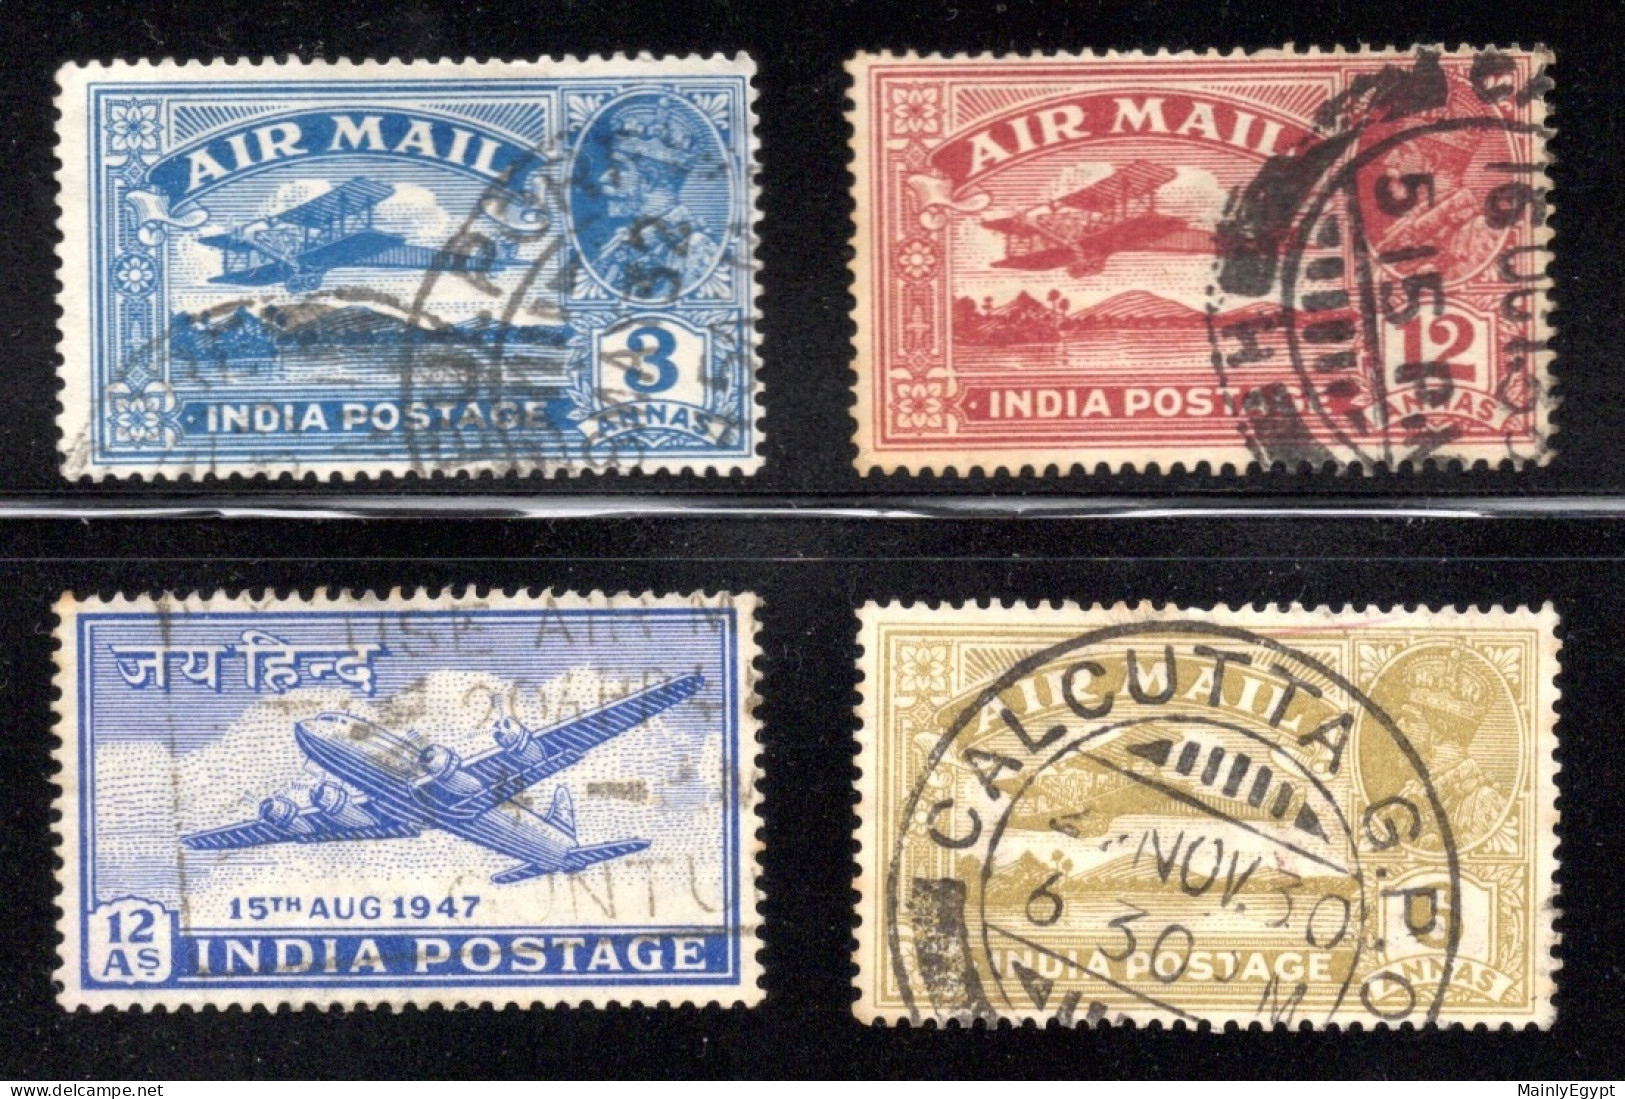 INDIA: 4 Airmail Stamps #19 - Gebraucht